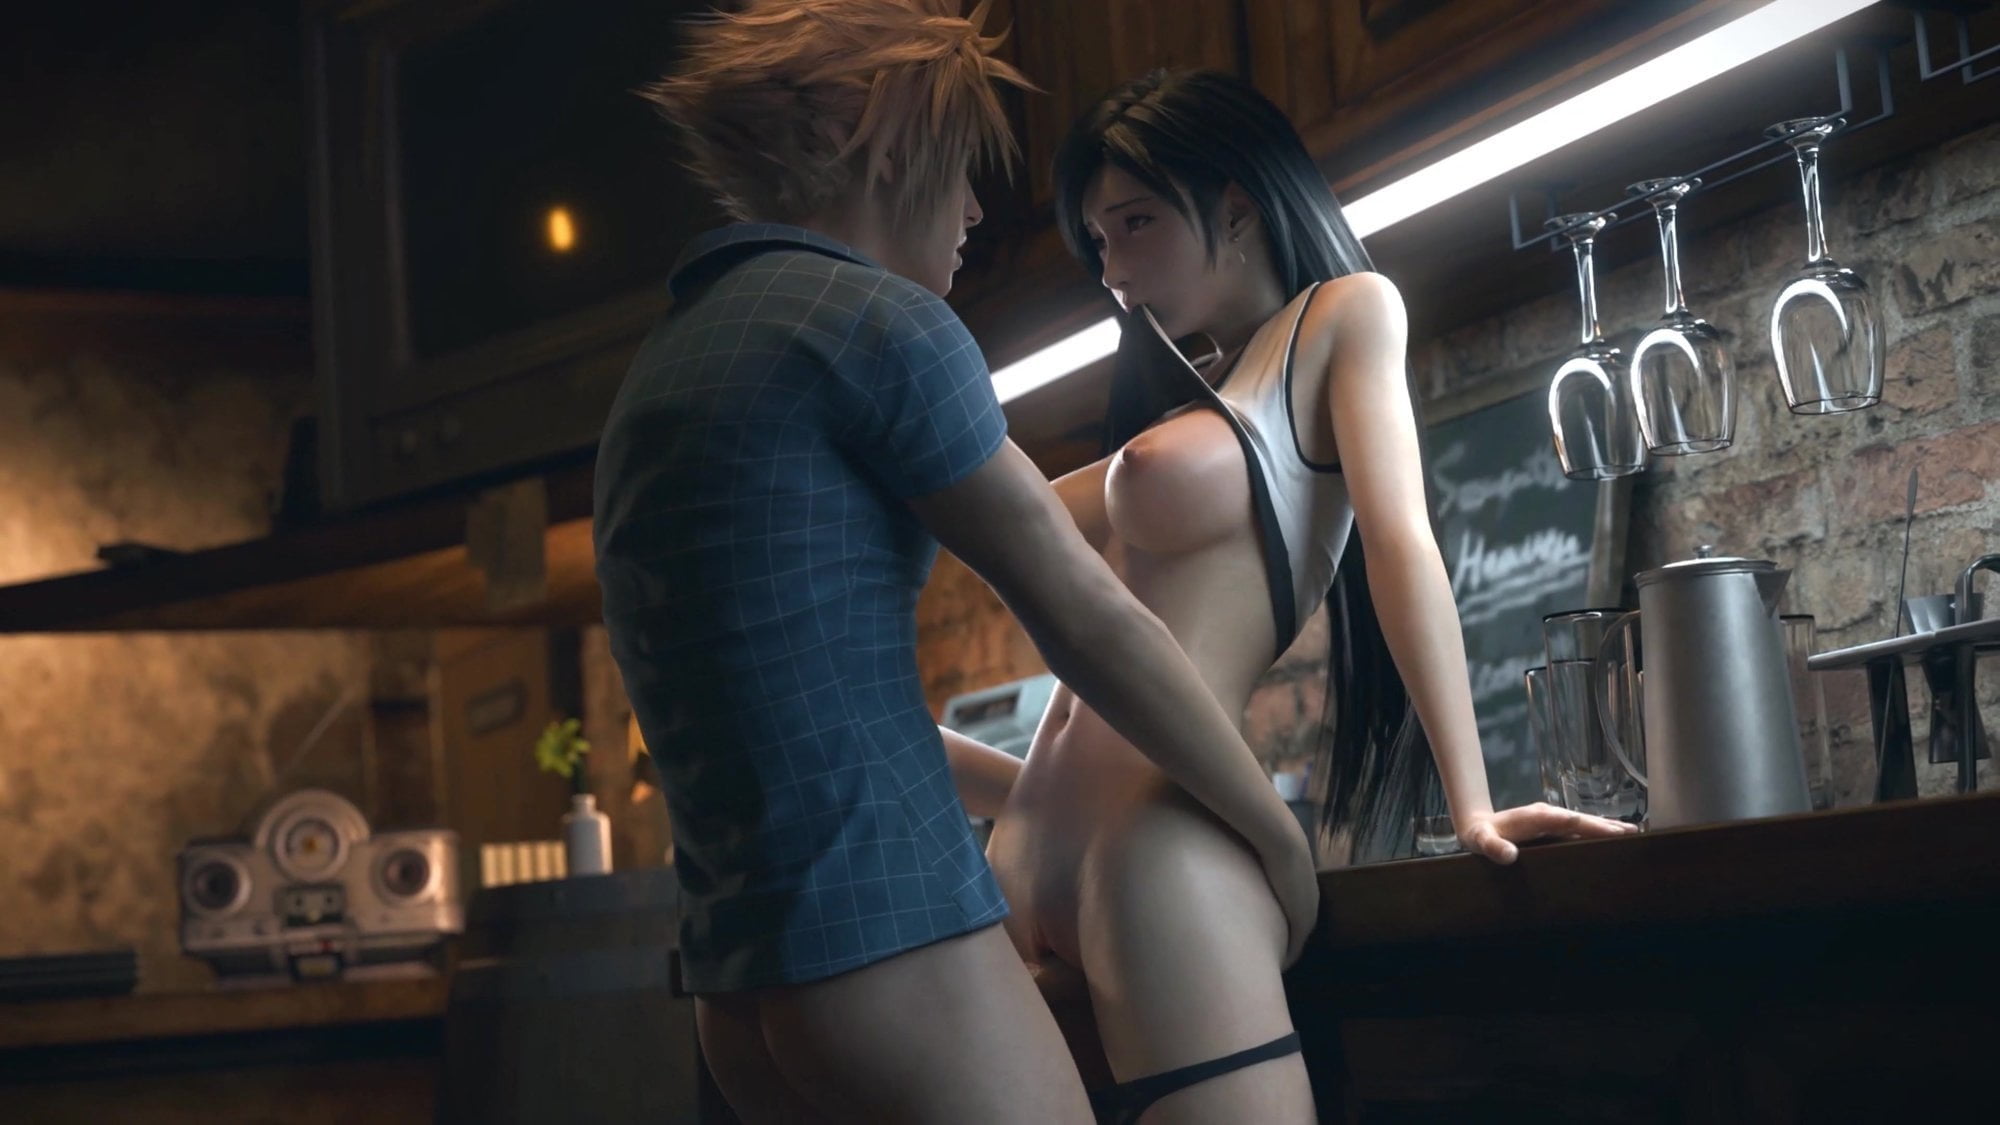 Watch Tifa Lockhart and Cloud Strife - Seventh Heaven video on xHamster